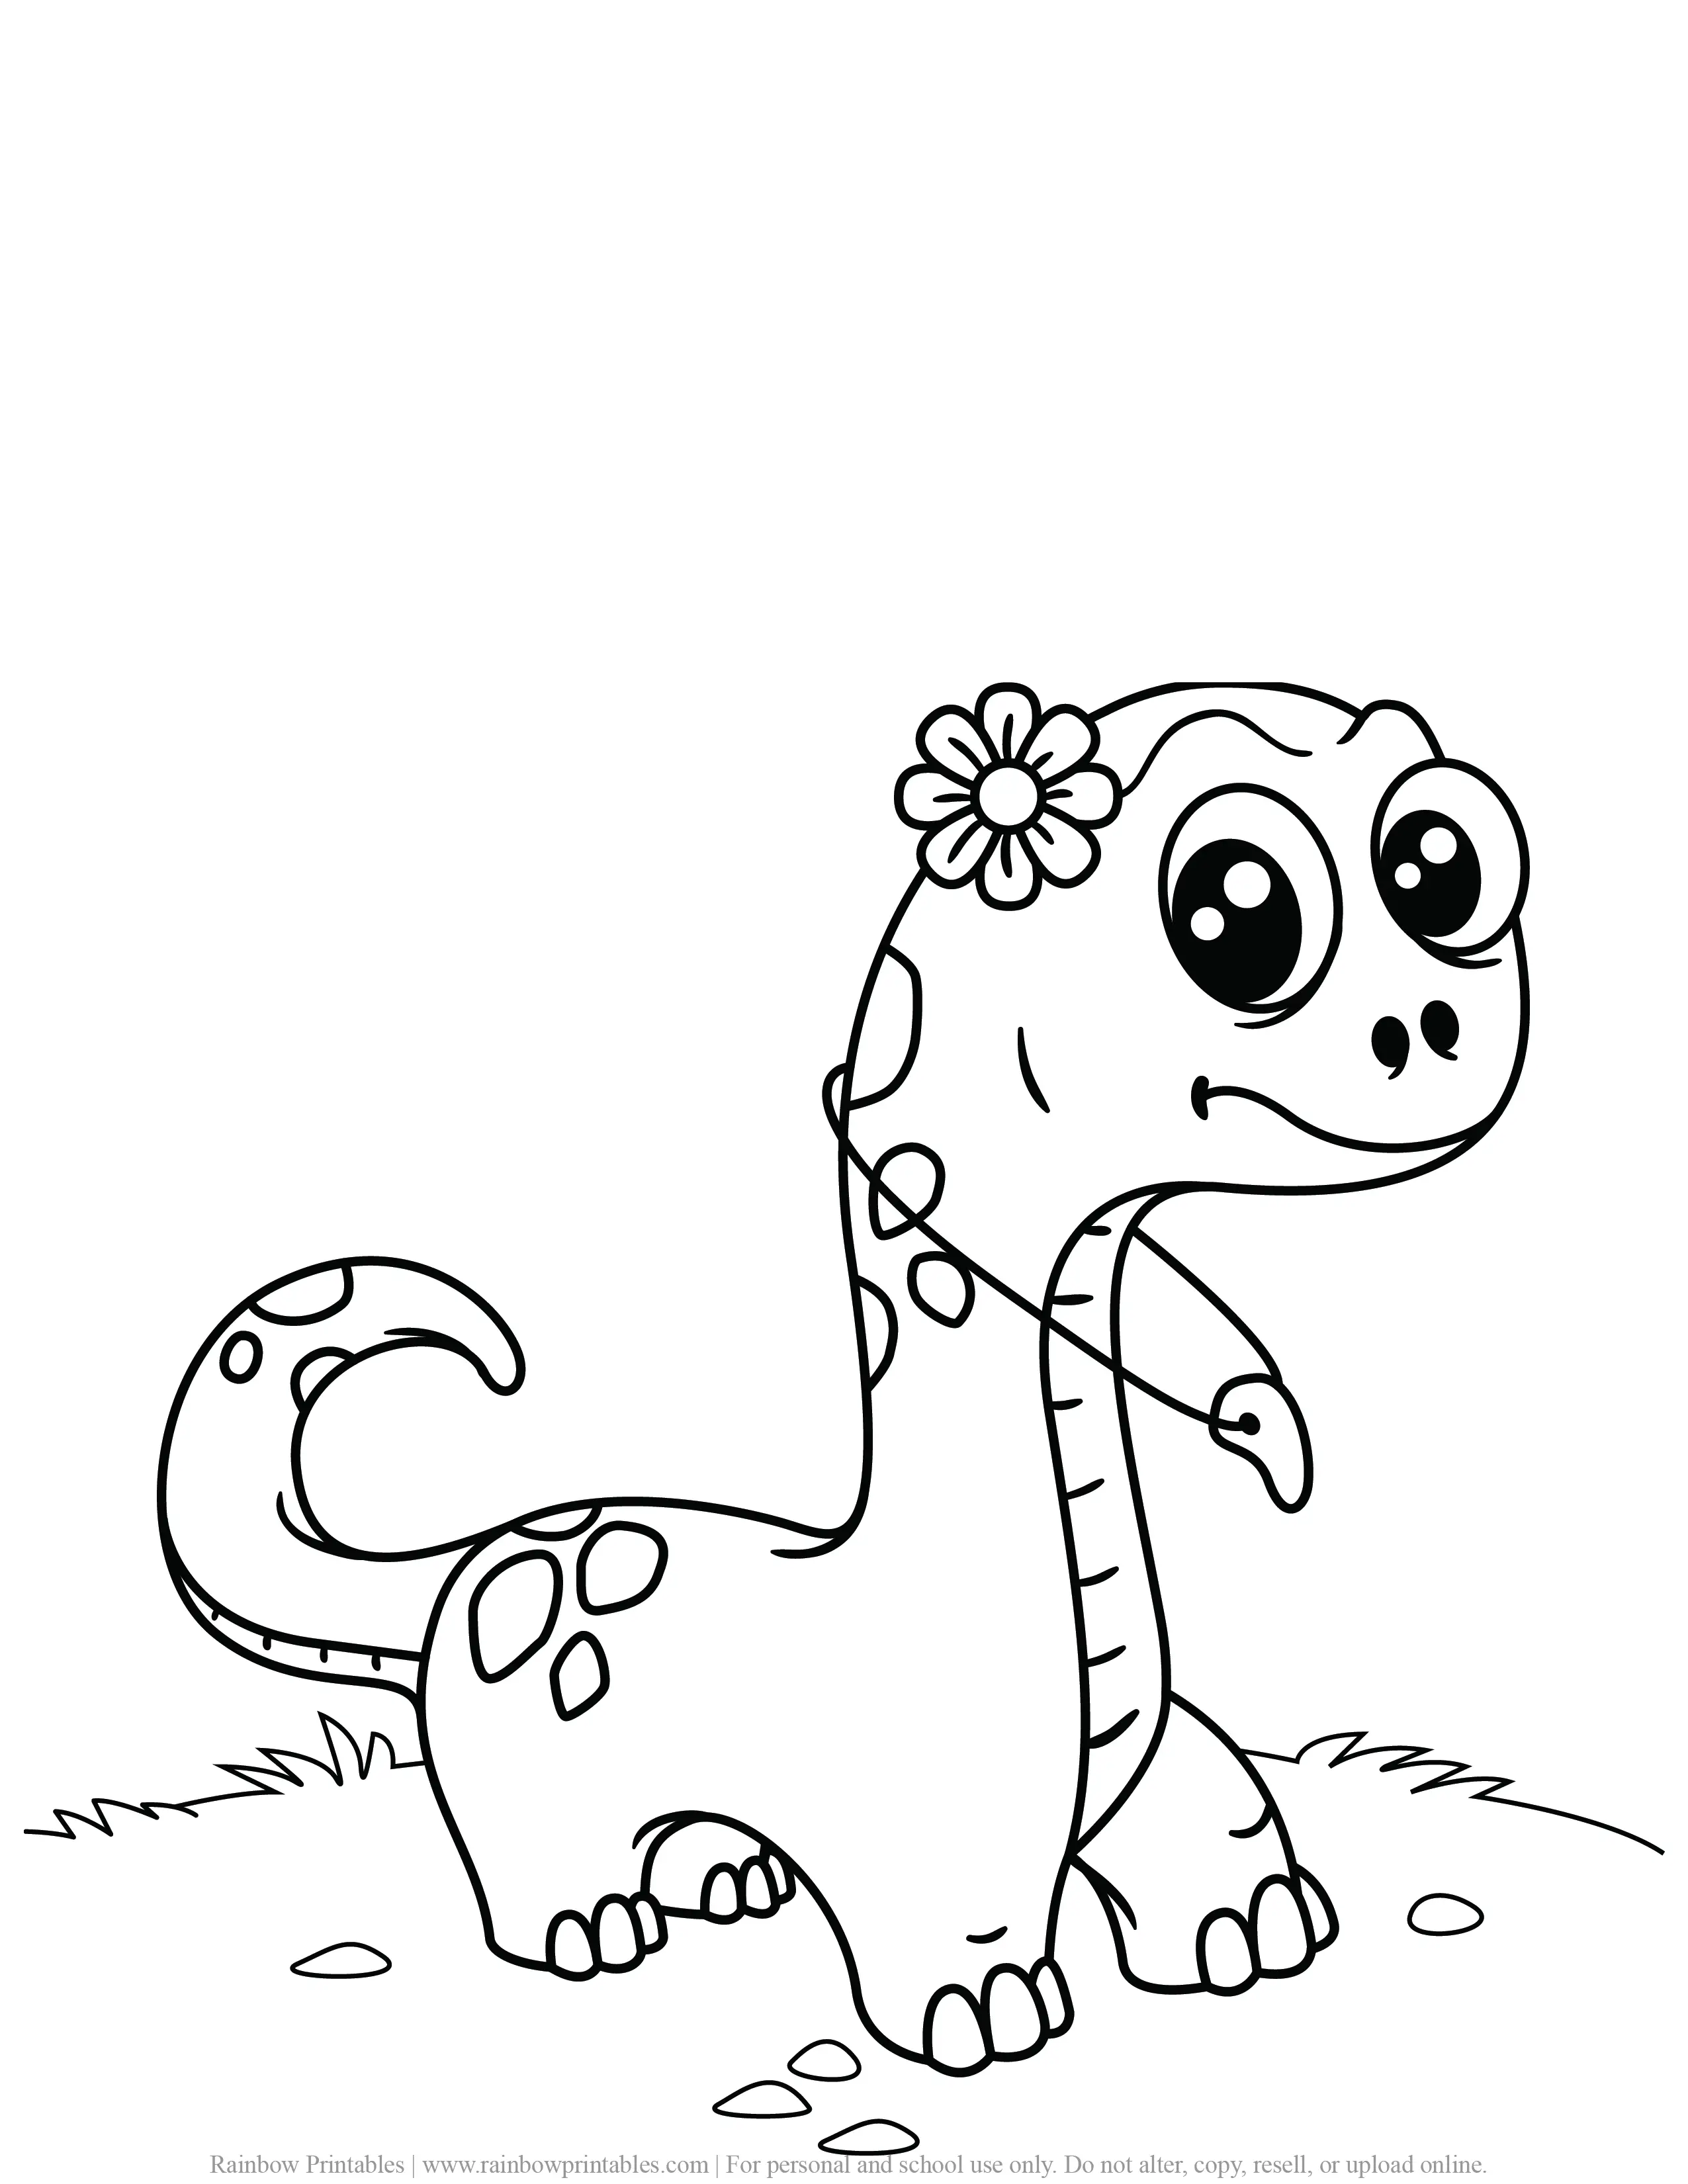 FREE DINOSAUR COLORING PAGES ACTIVITY FOR KIDS AND BOYS DINO DRAGON PRINTABLE-04